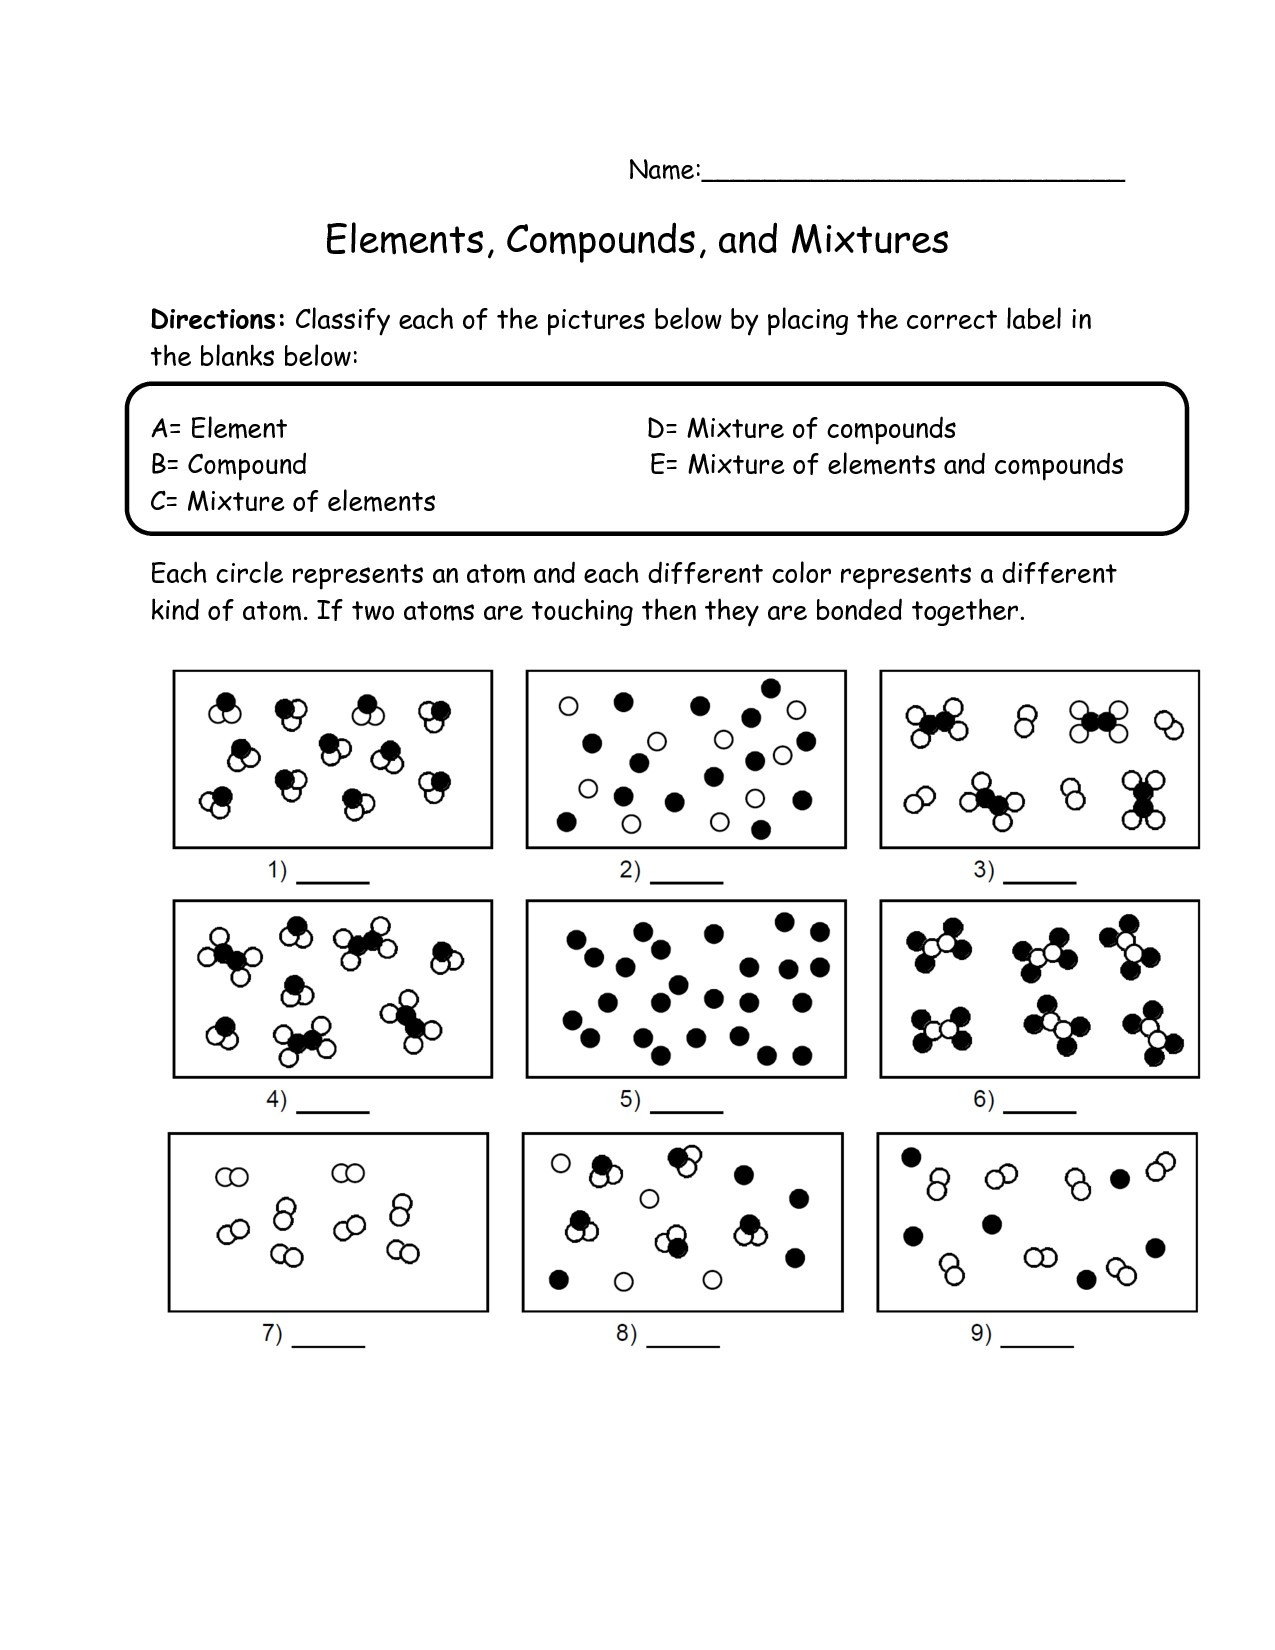 Elements Compounds Amp Mixtures Worksheet Appropriate Conduct Worksheets